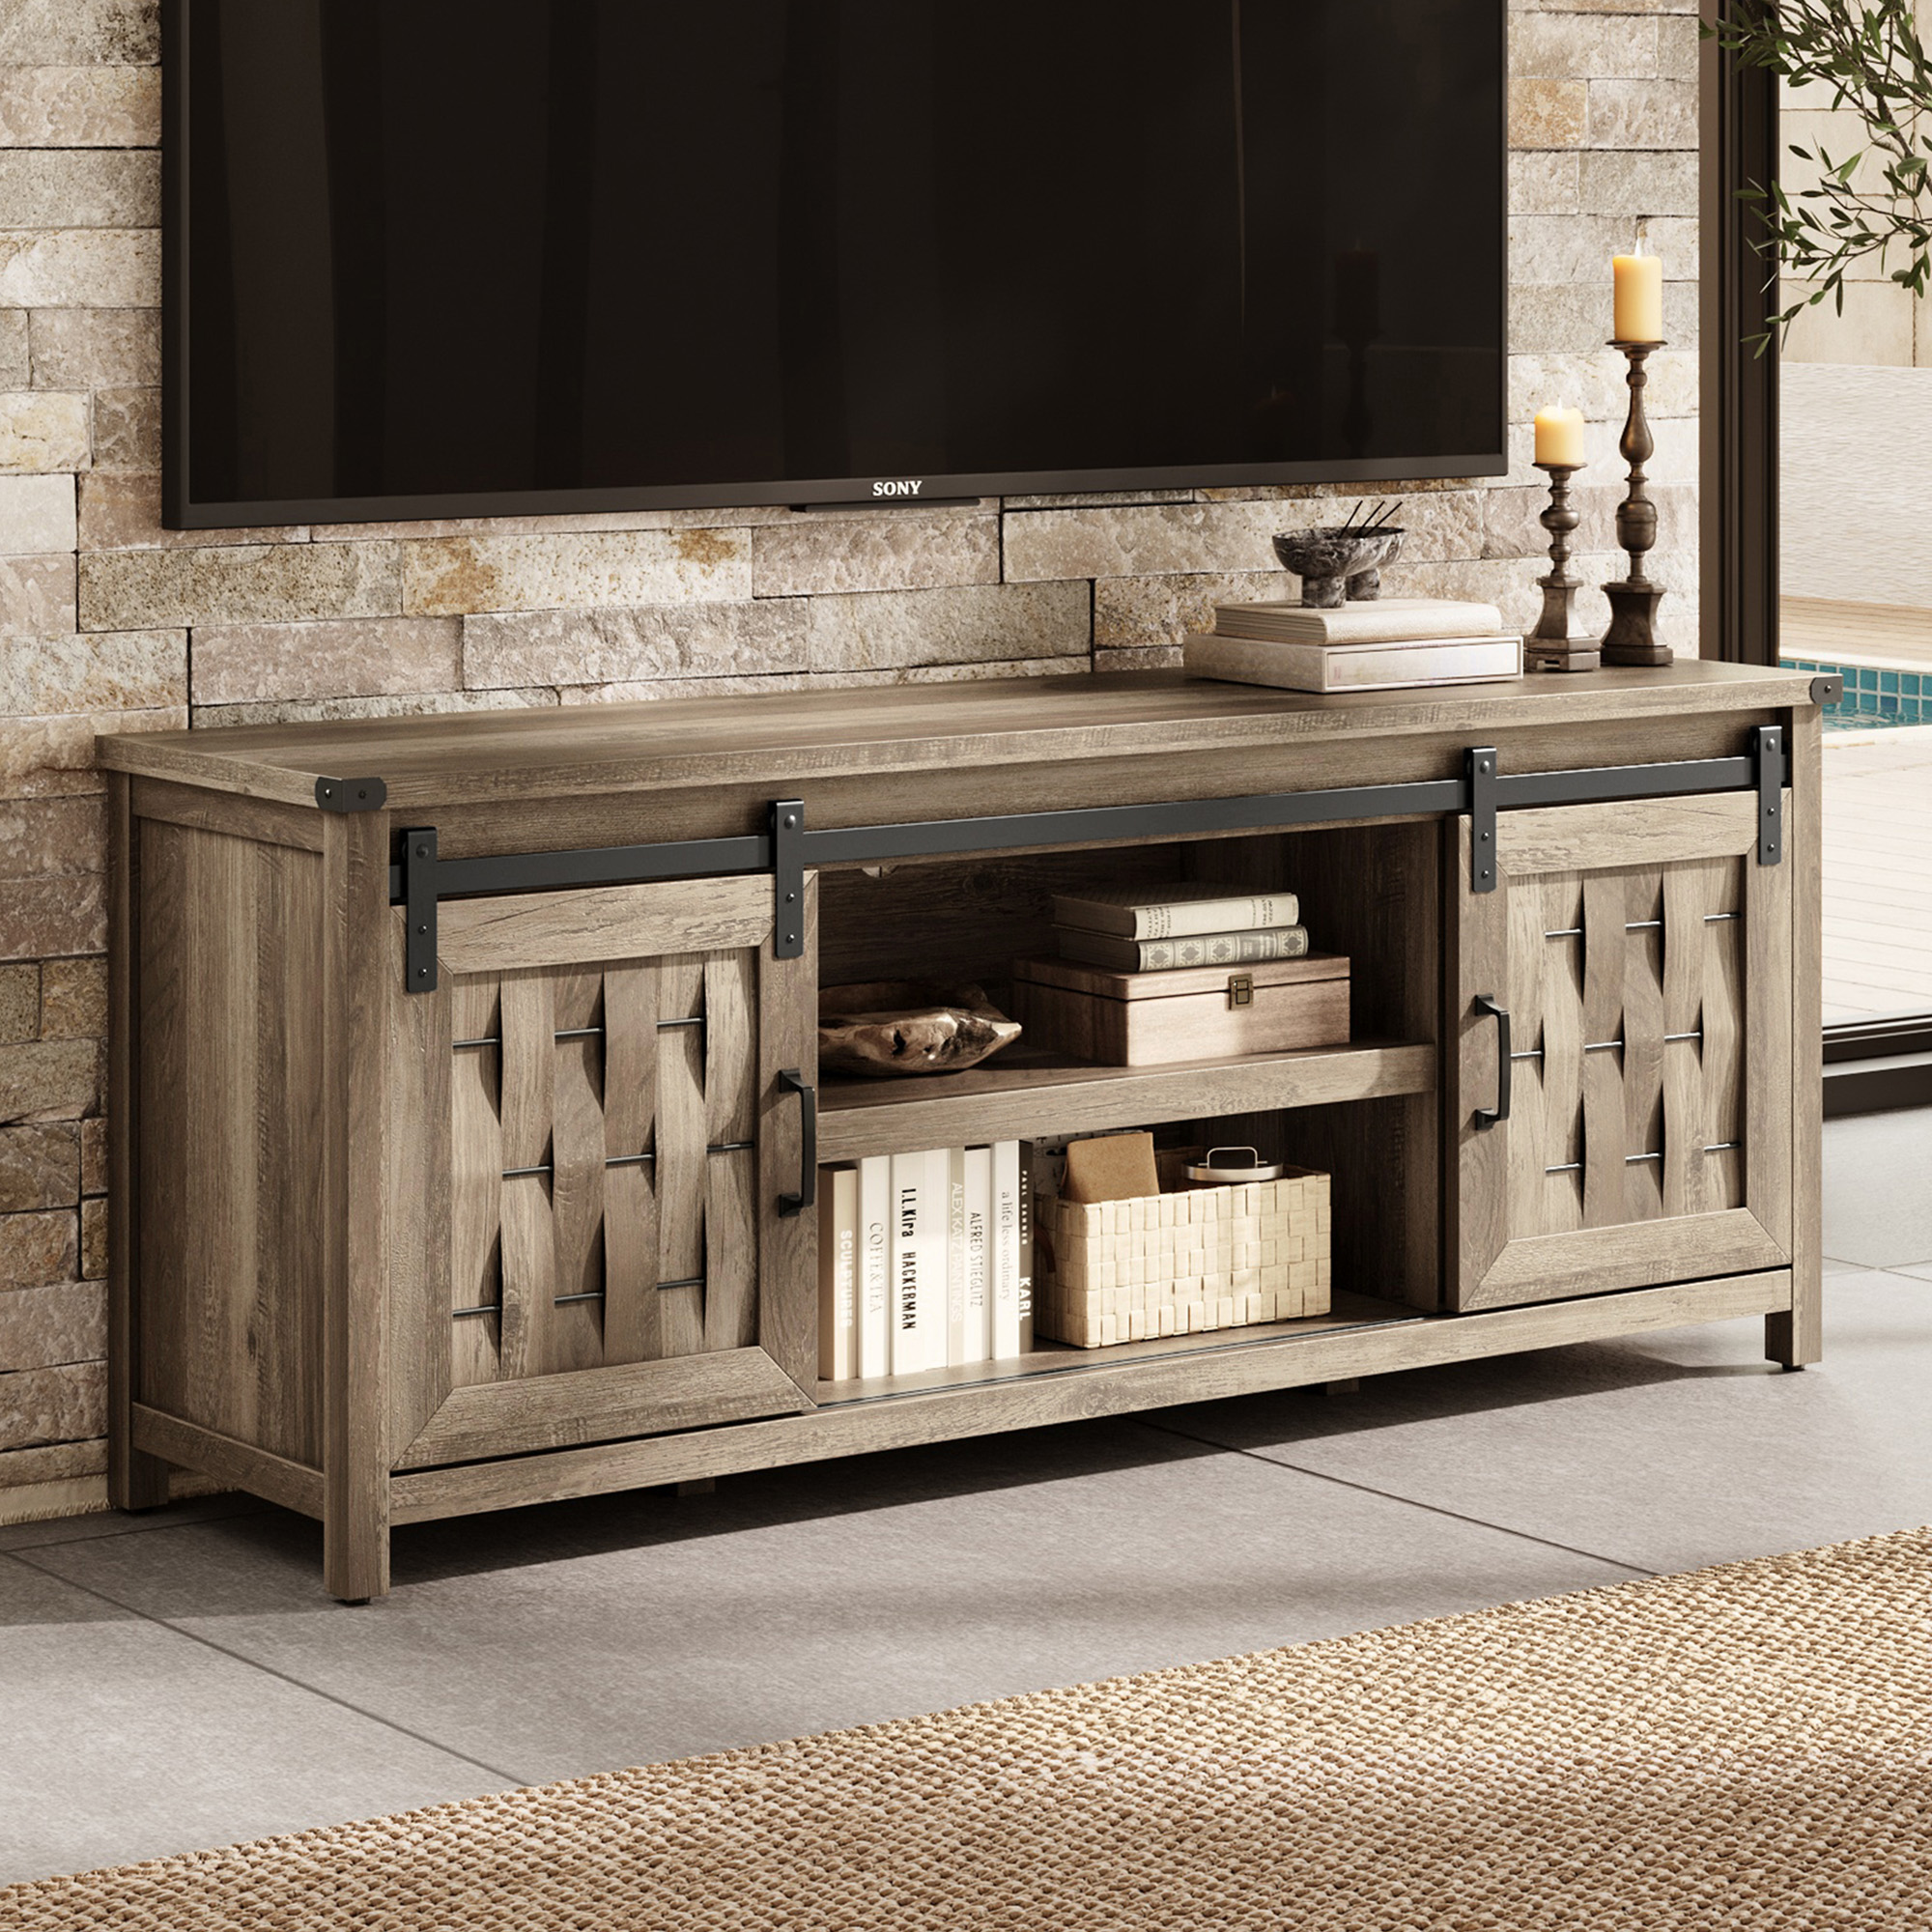 Farmhouse TV Stand for 65 inch TV, Entertainment Center with Storage Cabinets and 2 Sliding Barn Doors